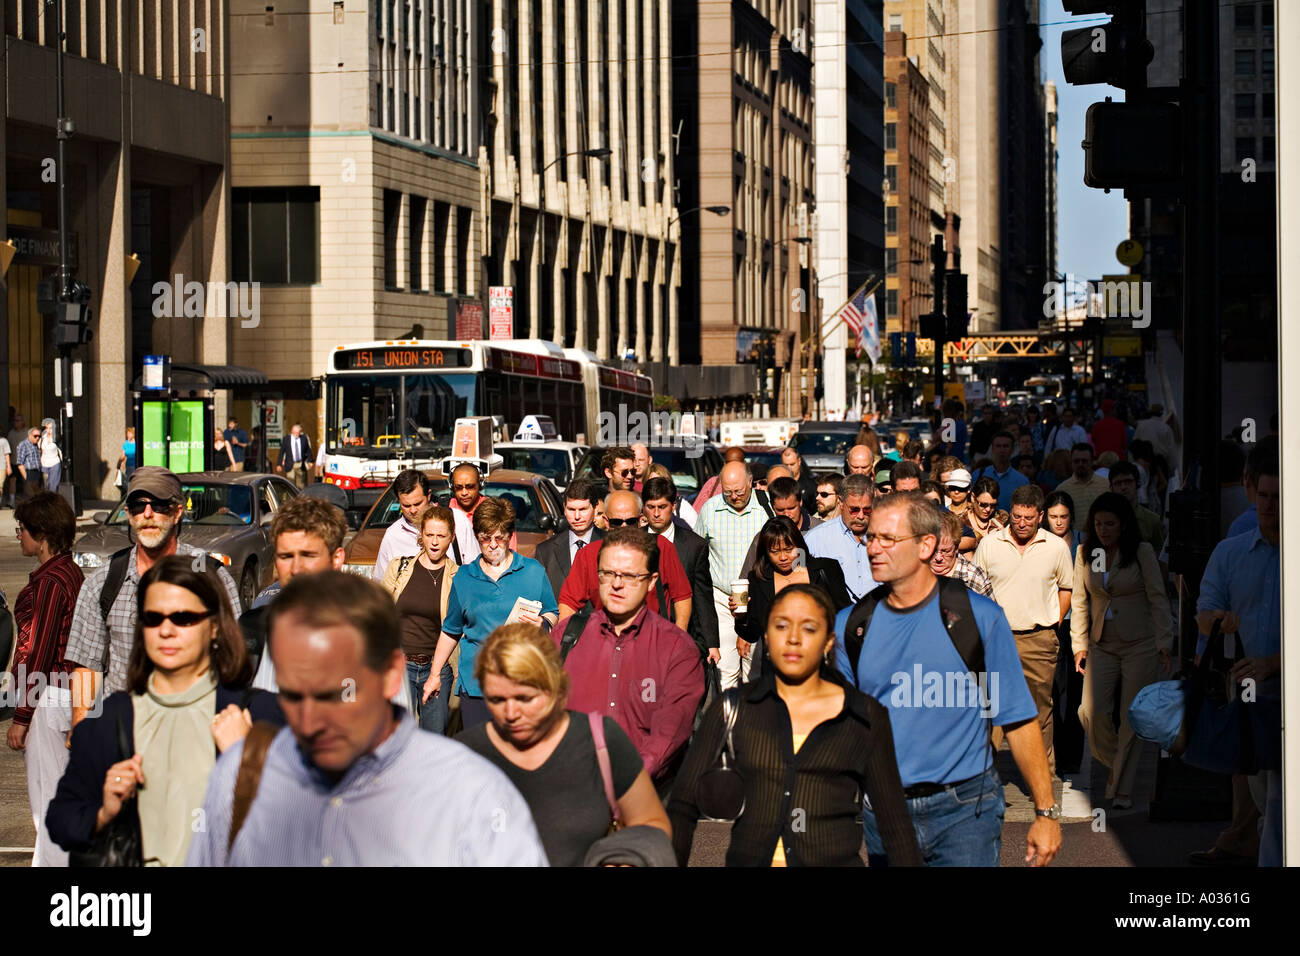 illinois-chicago-rush-hour-street-and-pedestrian-traffic-in-late-afternoon-A0361G.jpg